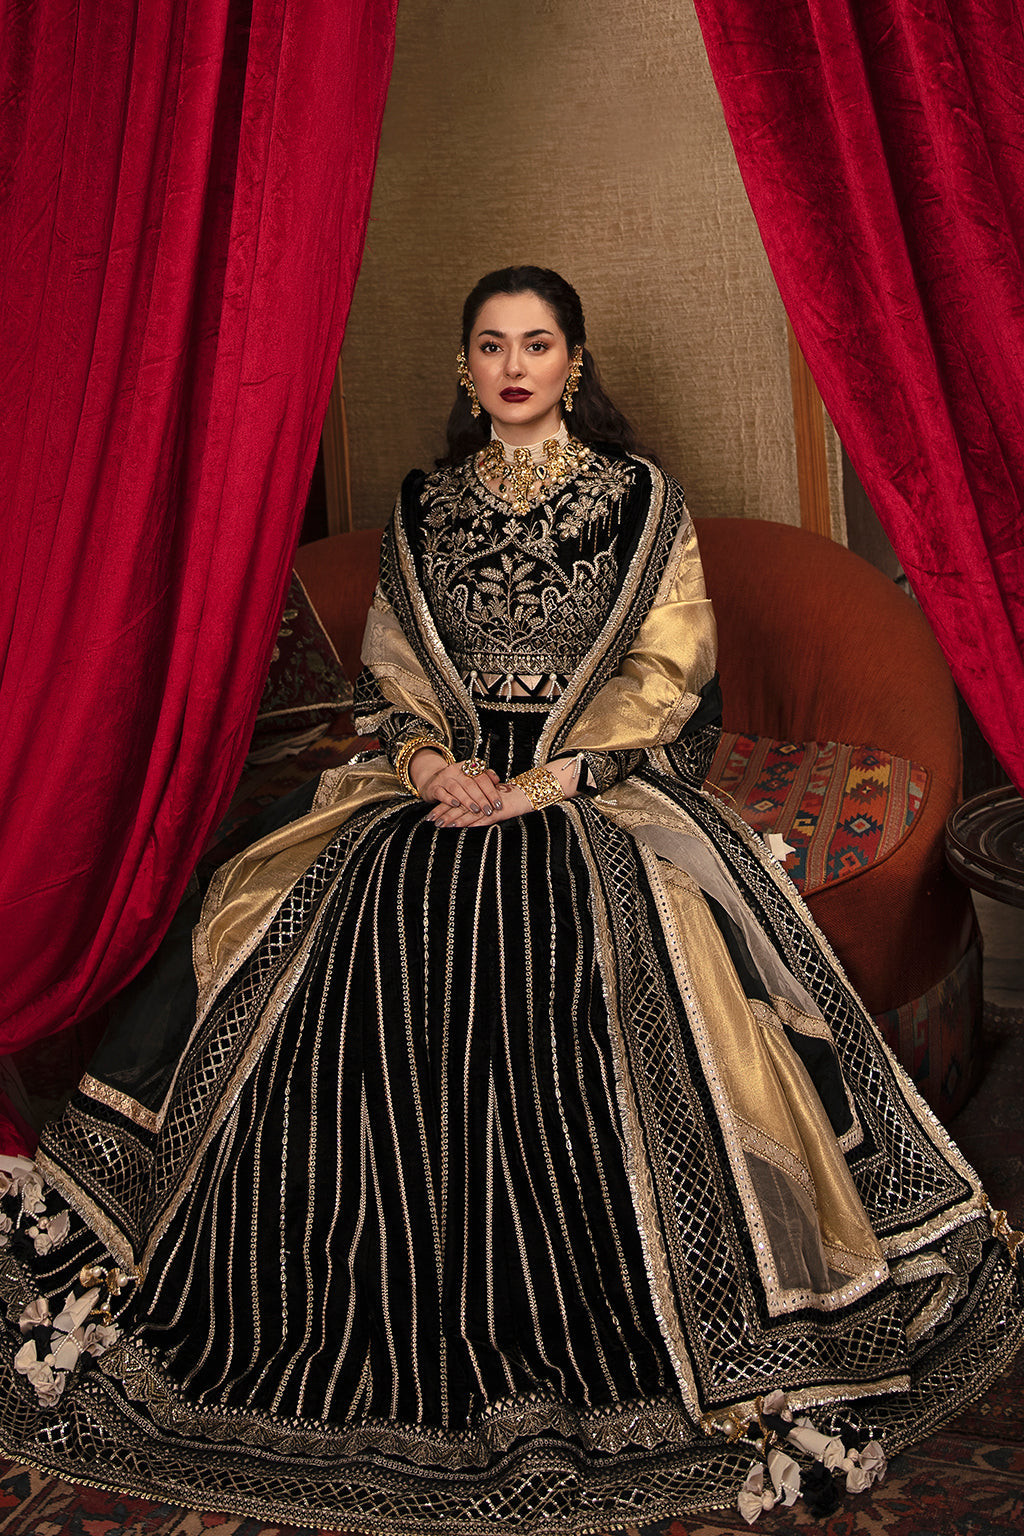 Naghma by Afrozeh (261-SHAH BEGUM)